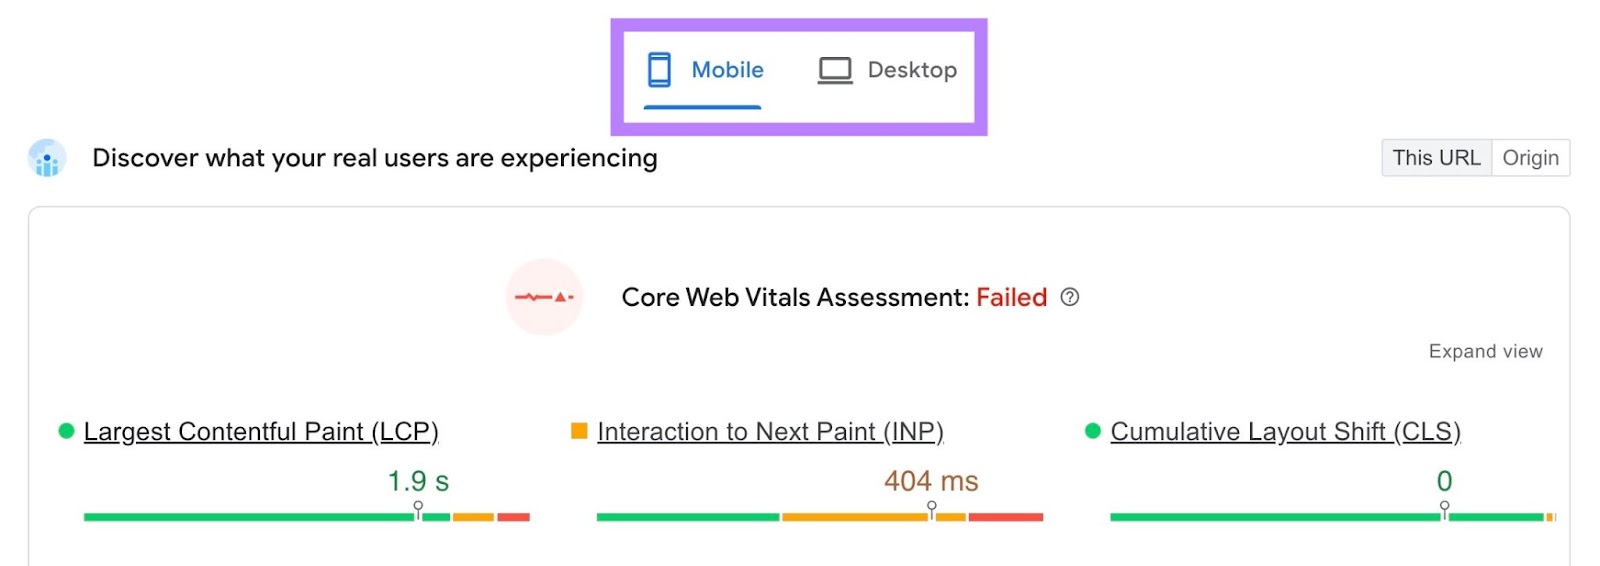 “Core Web Vitals Assessment” on "Pagespeed Insights" with the "Mobile/Desktop" toggle on top of the page highlighted.